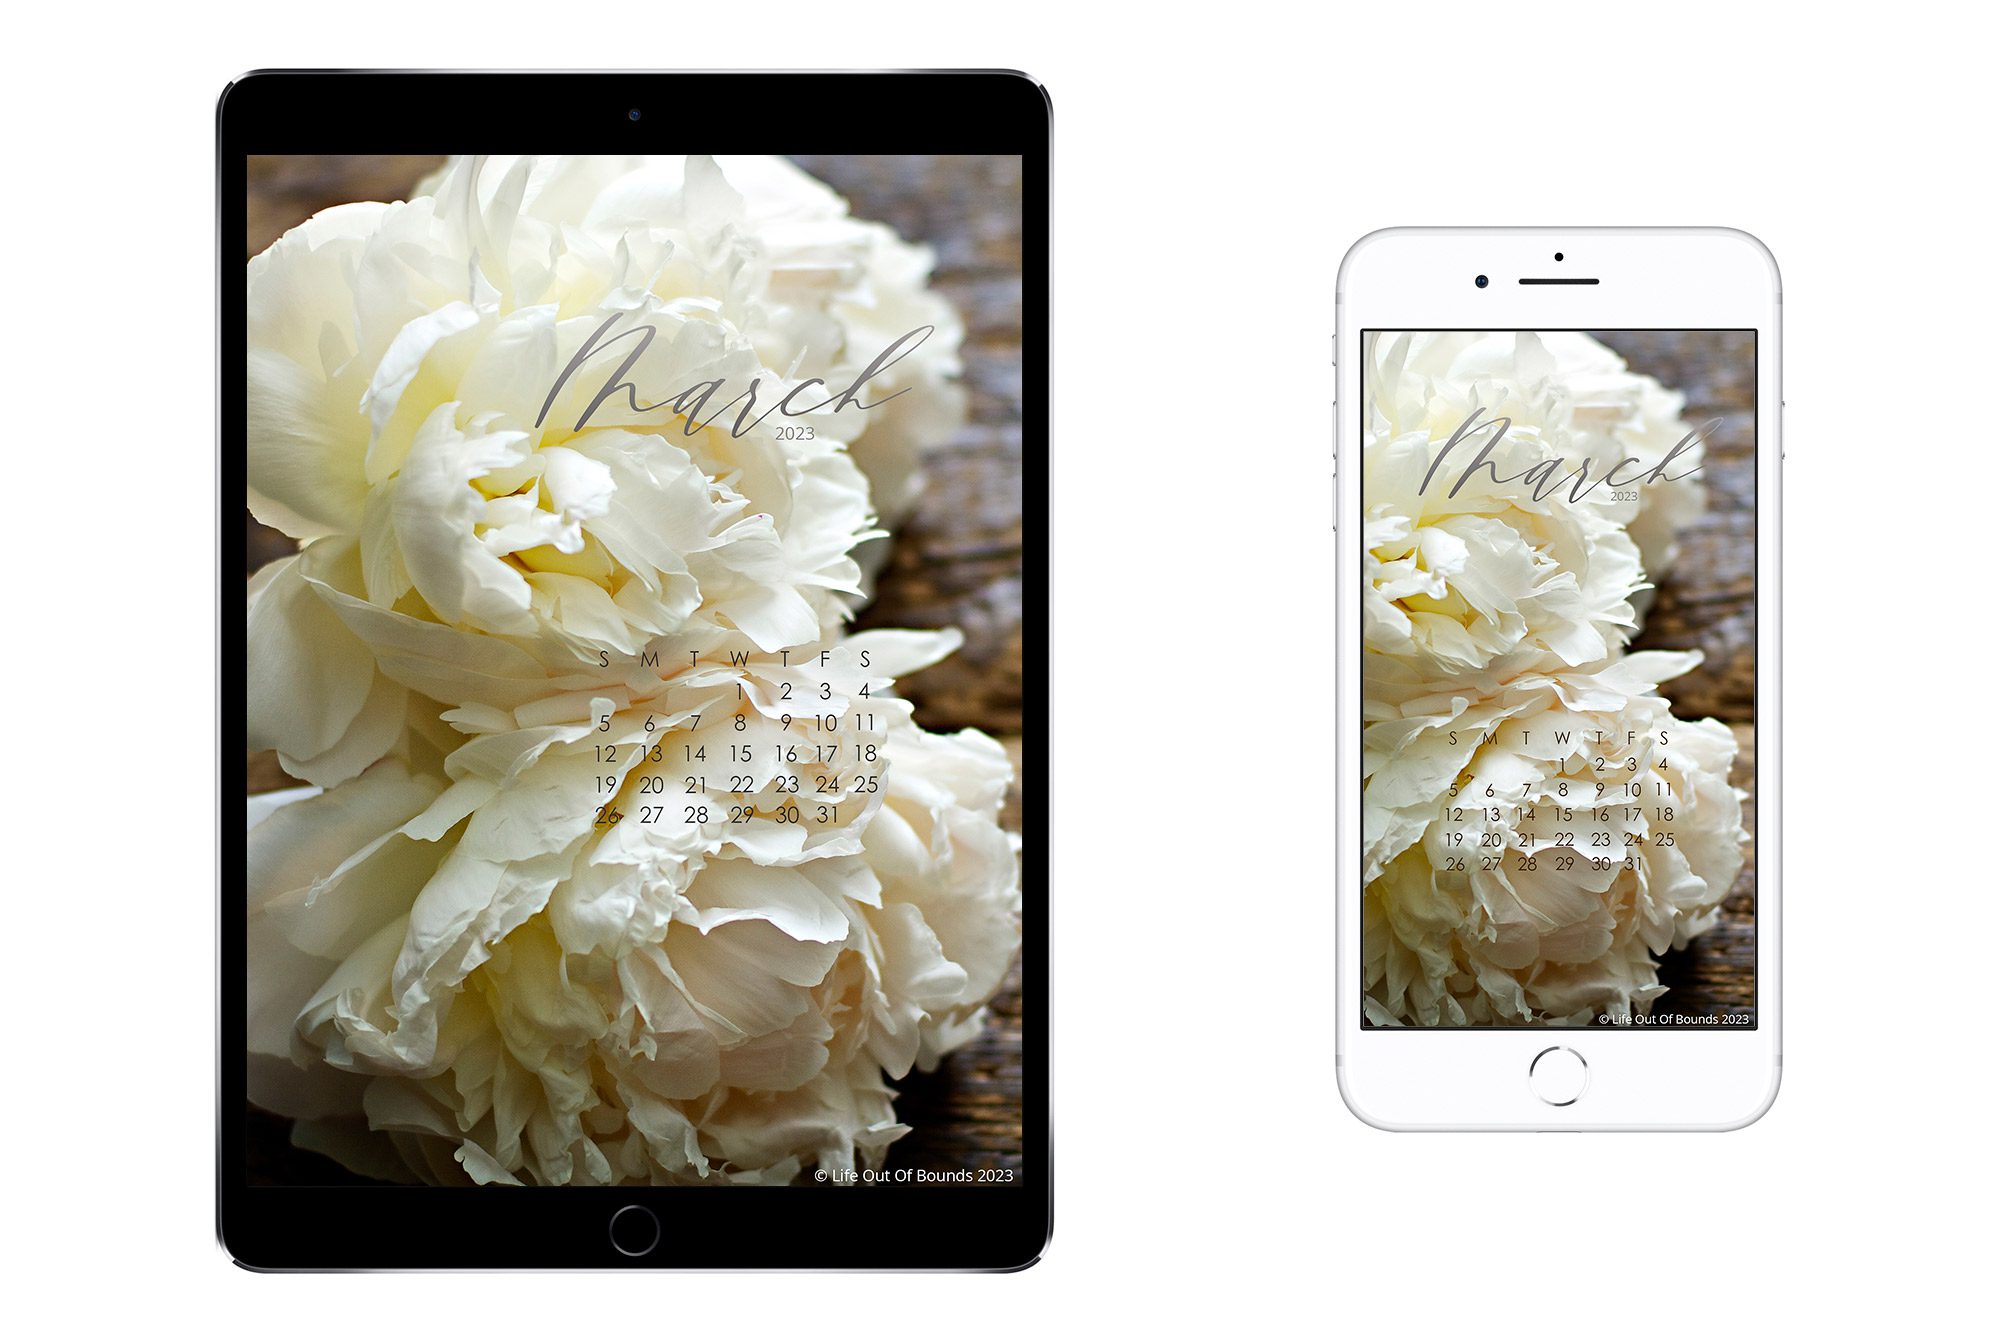 March-23-free-calendar-wallpaper-for-ipad-tablet-iphone-smartphone-featuring-white-peonies